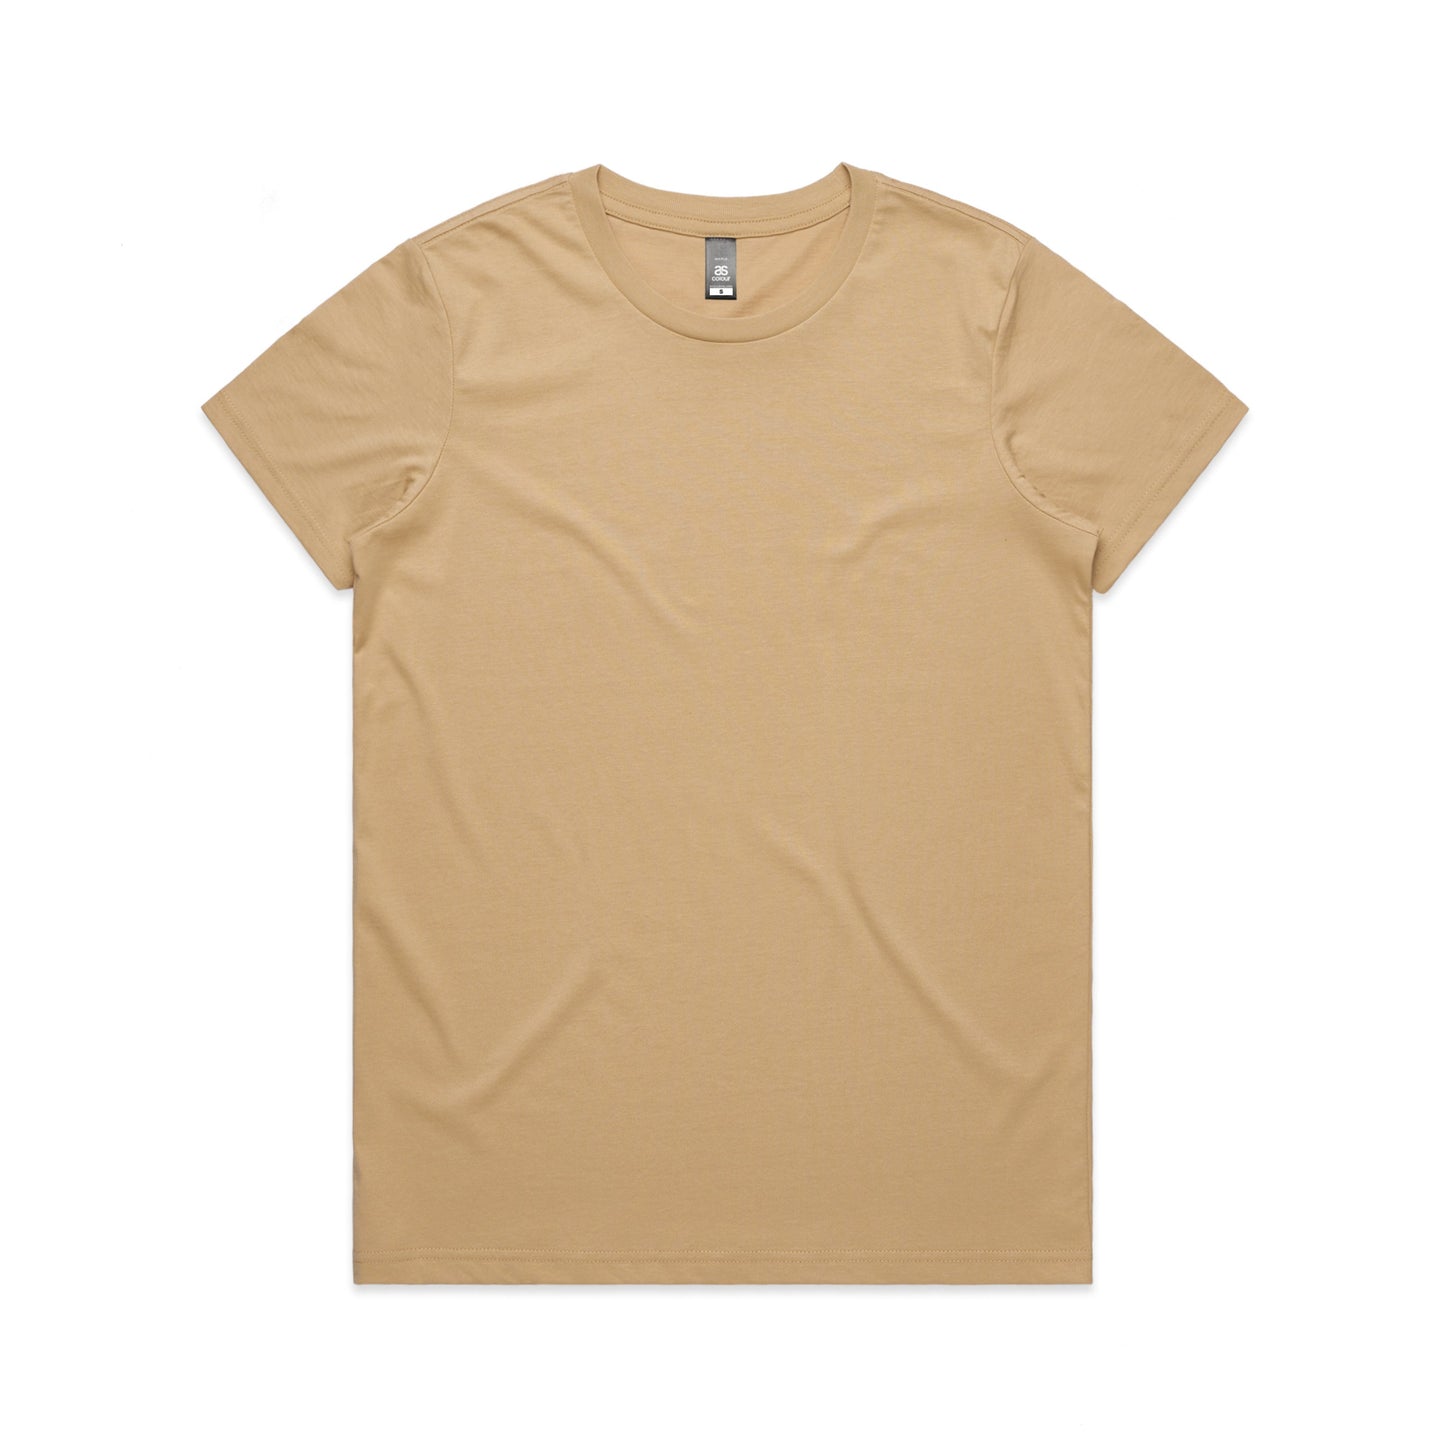 "Live Like Phoebe" Relaxed Maple T-Shirt